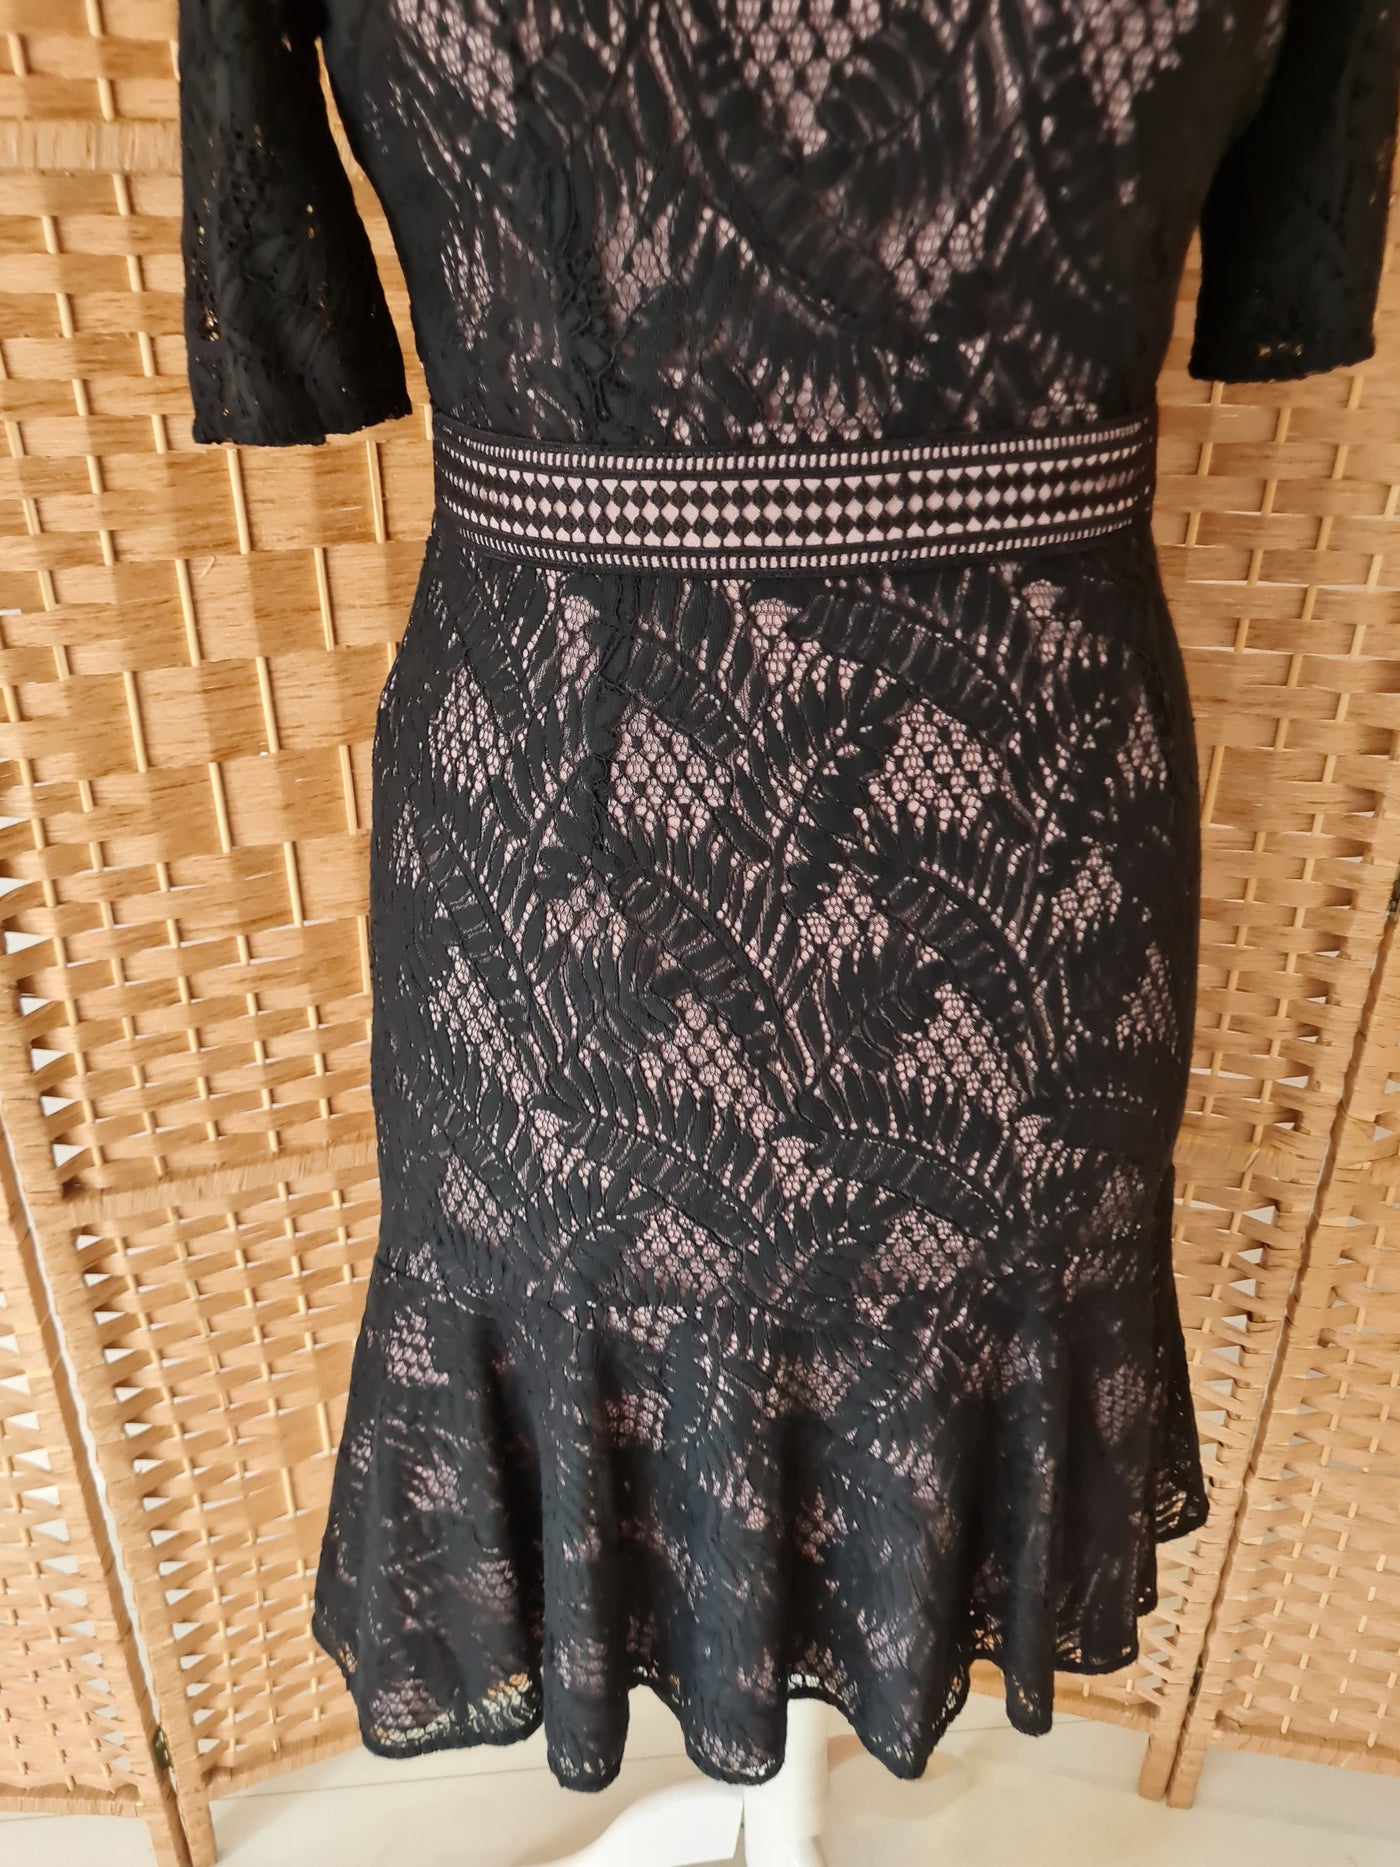 Paisie Black & Nude Lace Dress Size 12 New RRP £99